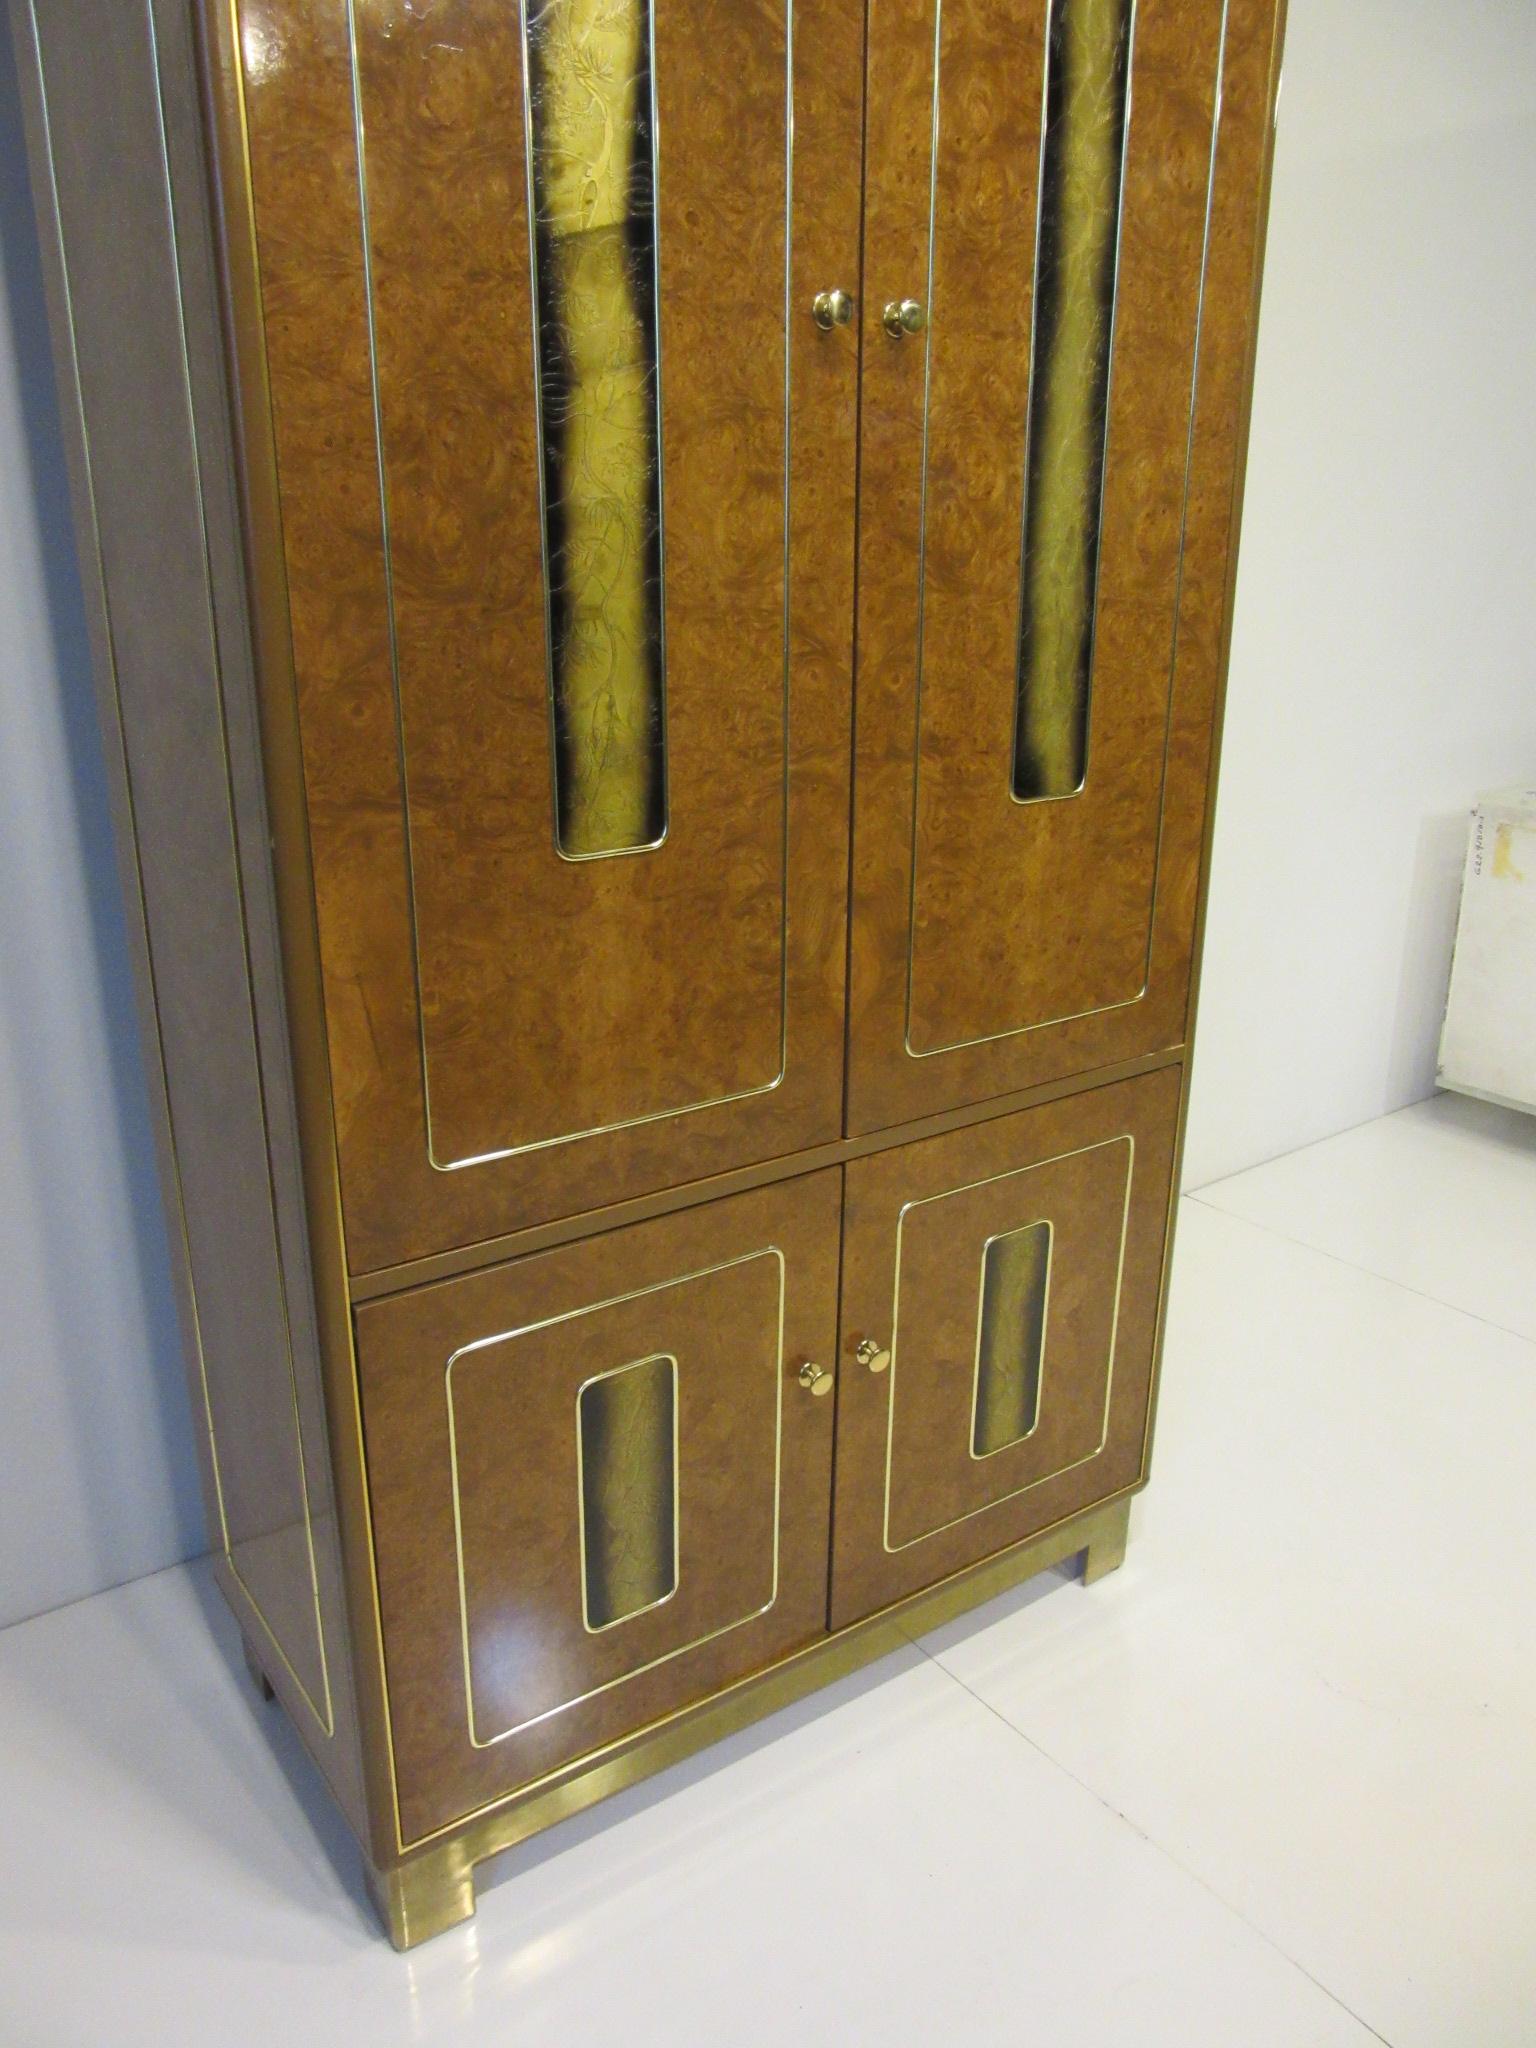 Burl / Brass Tall Chest or Armoire with Acid Etched Panels by Romweber 1